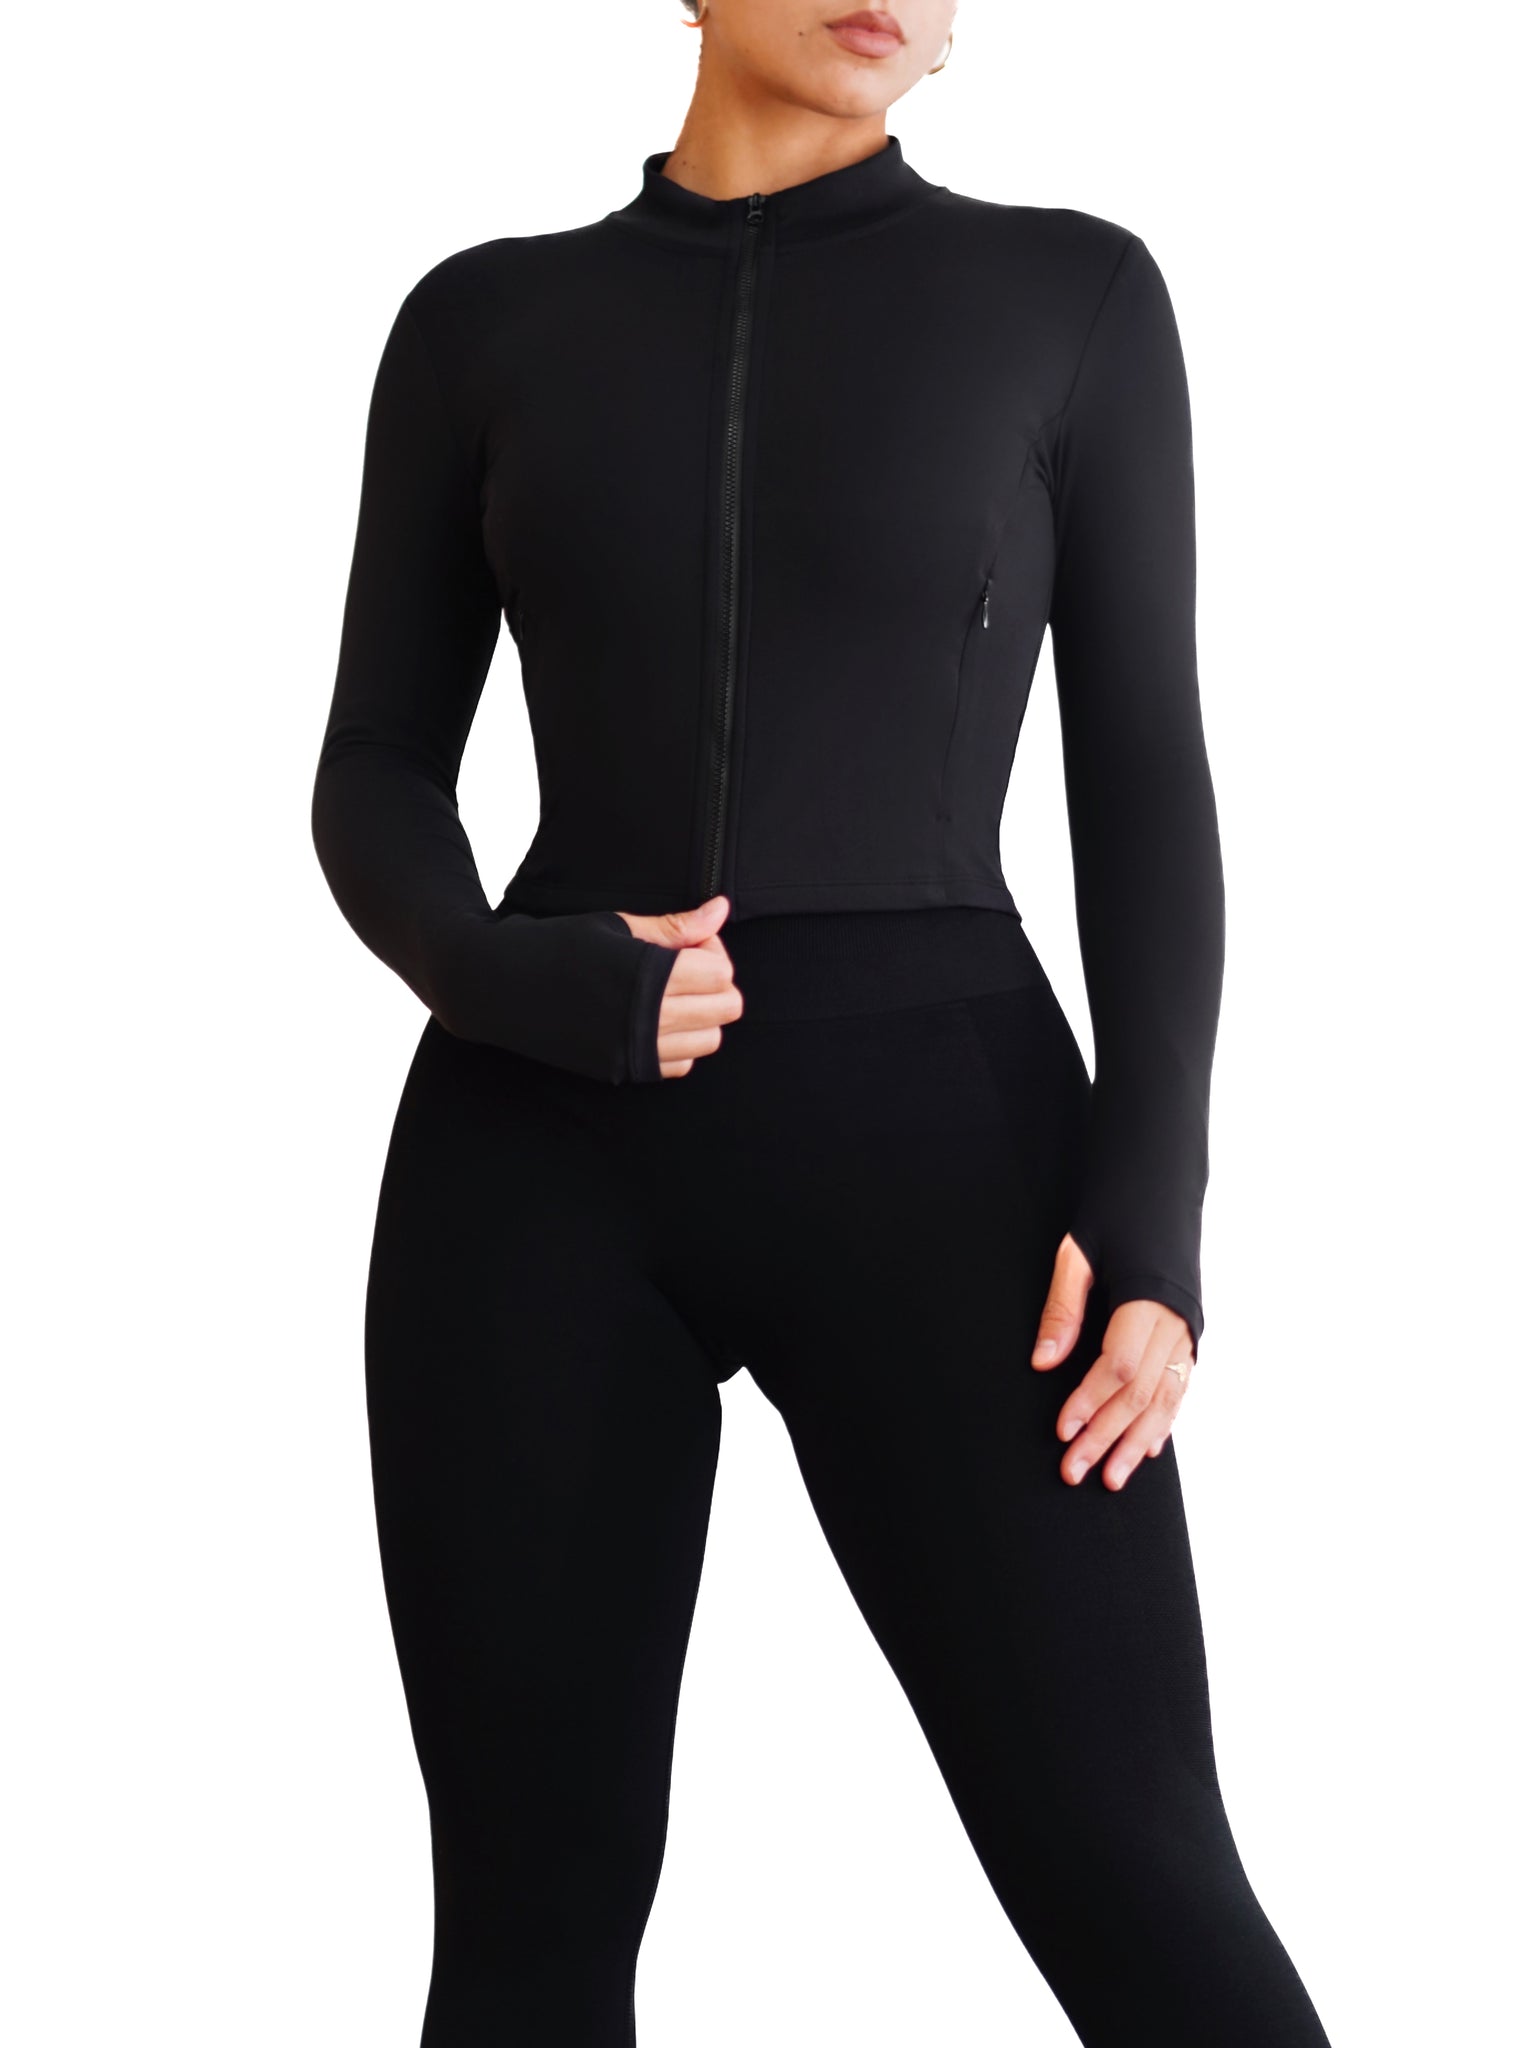 Fitted BBL Compression Jacket (Black) – Fitness Fashioness